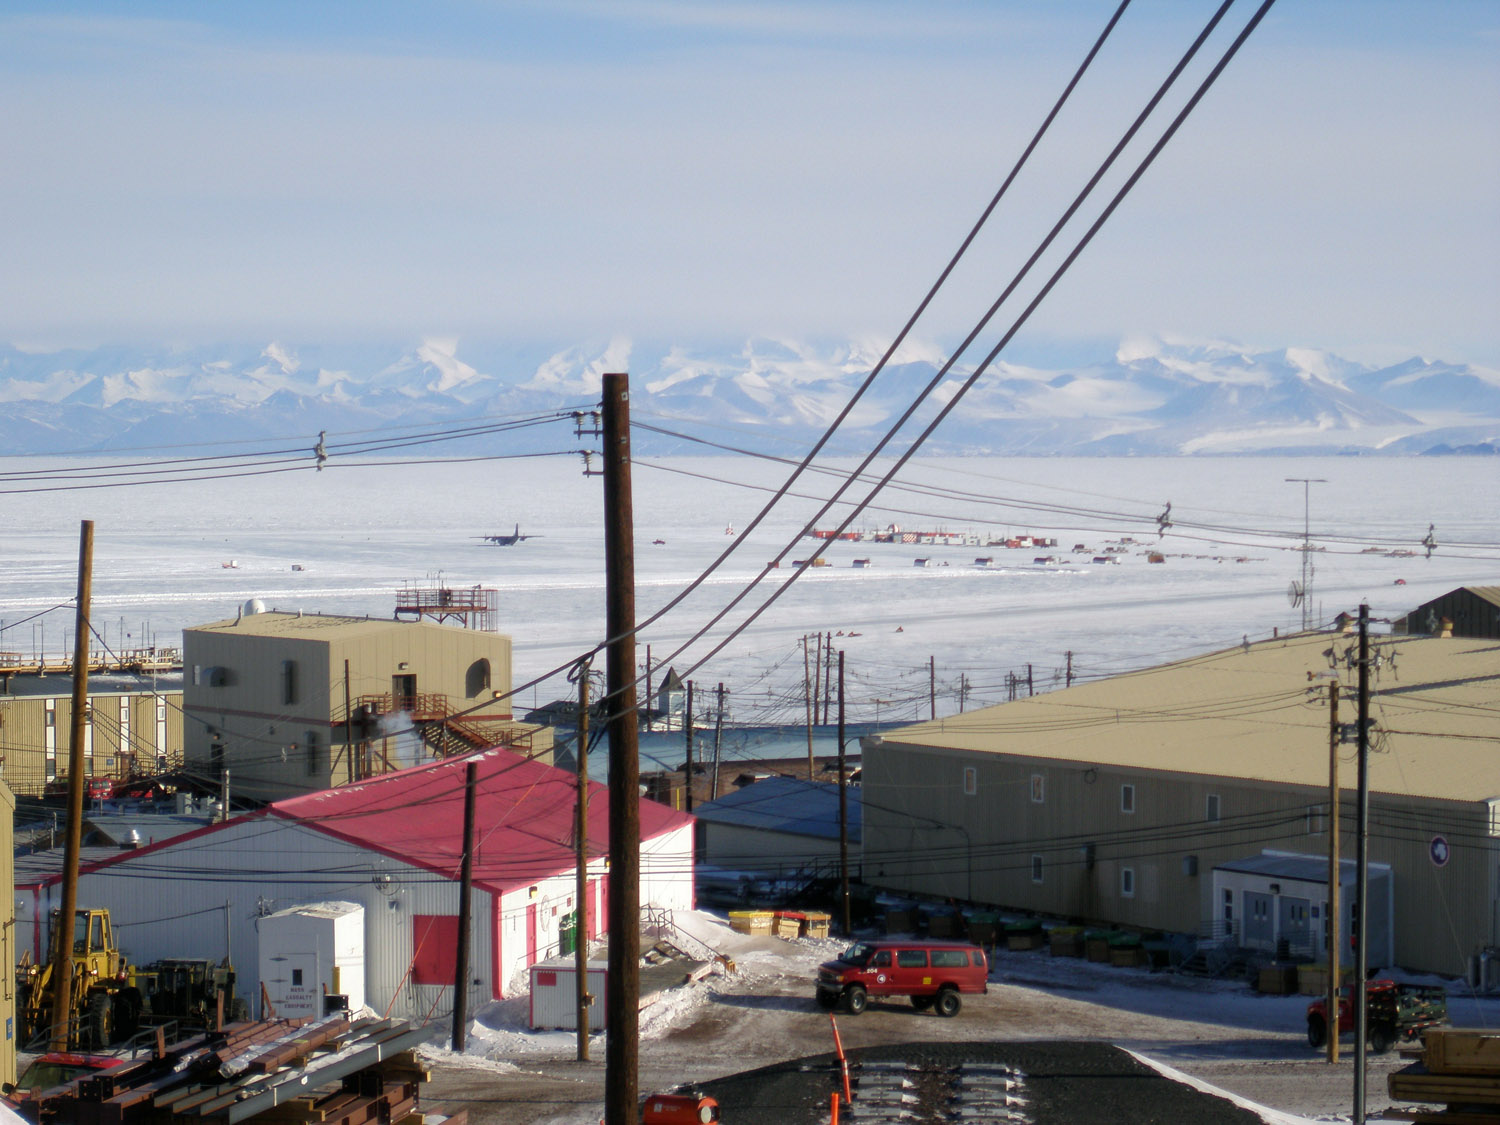 McMurdo Station in early summer